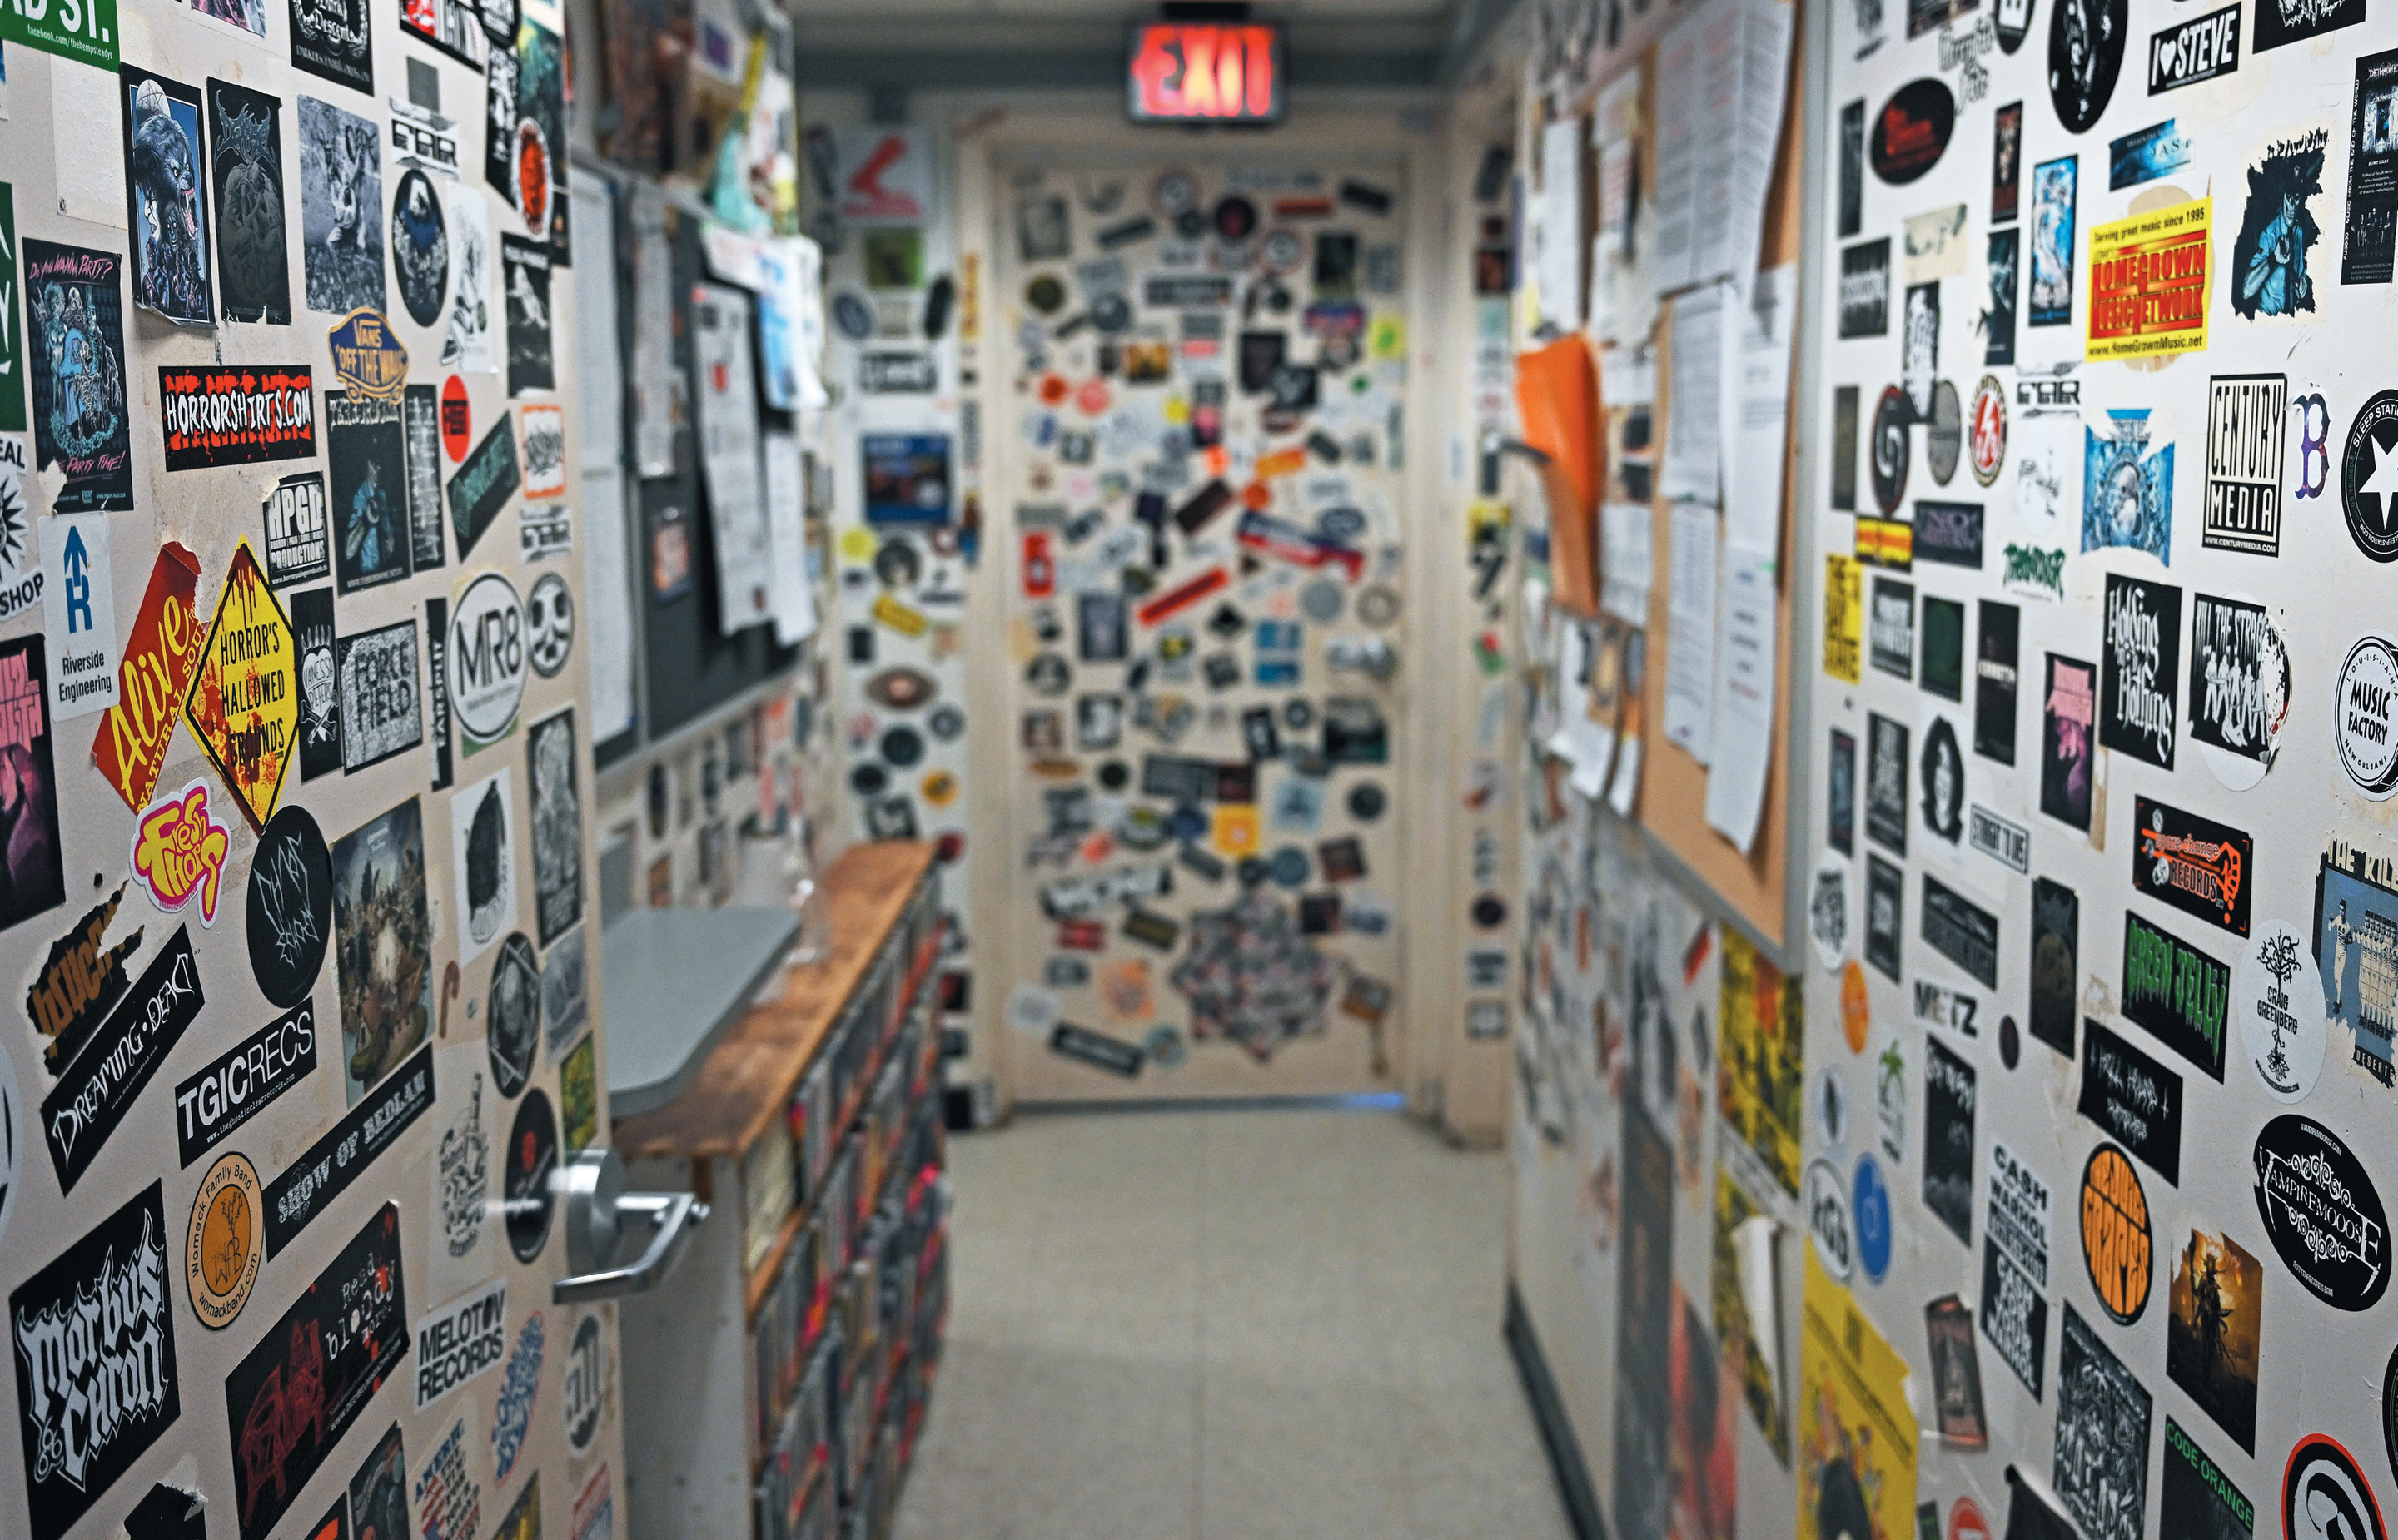 Hundreds of band stickers on the wall at WCNI